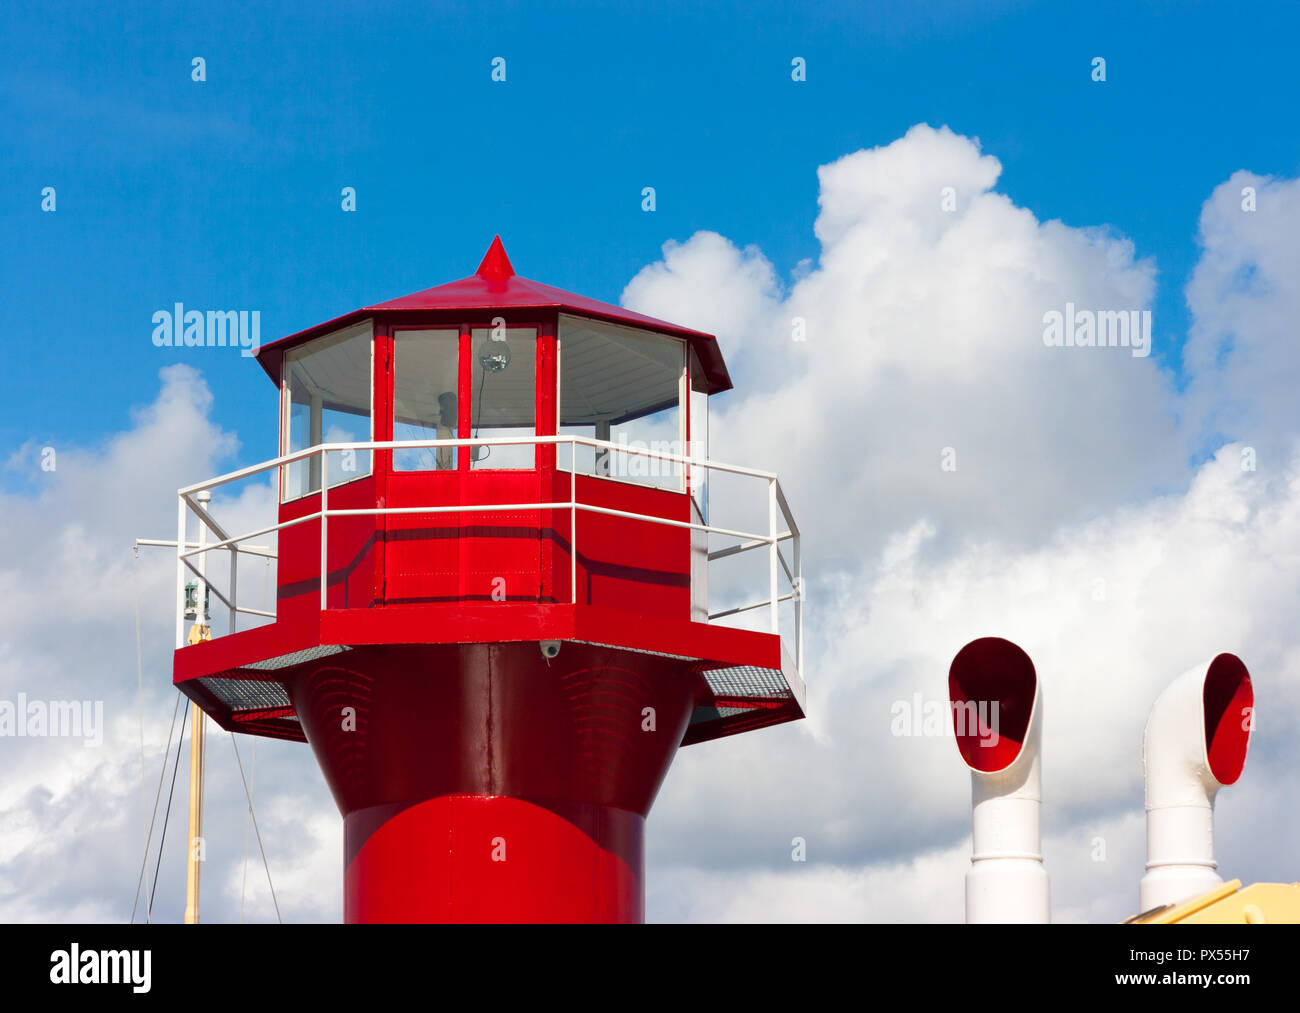 Detail of a fishing boat spotting tower against blue sky in Stockholm, Sweden, Europe Stock Photo